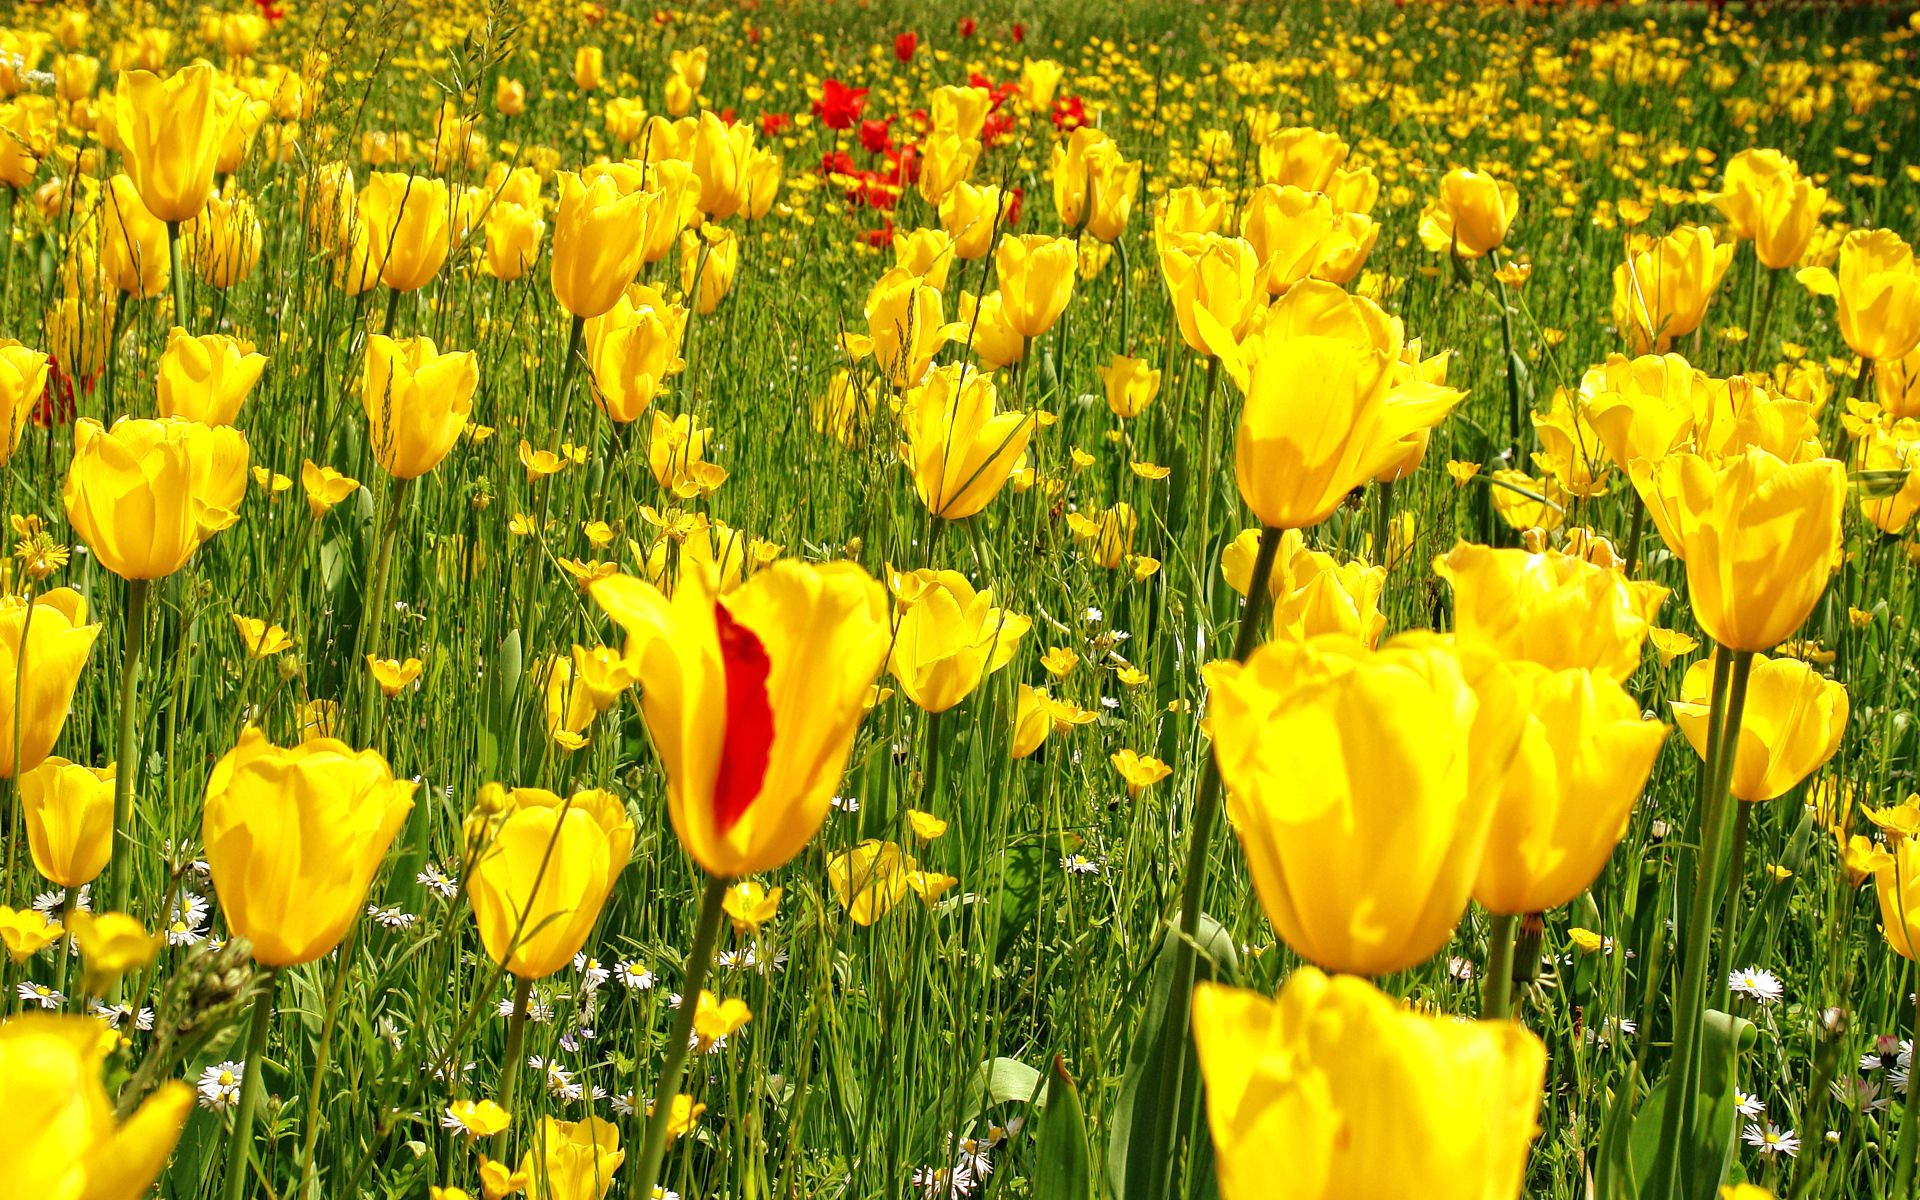 Cool Wallpapers meadow, nature, flowers, grass, tulips, dandelions, camomile